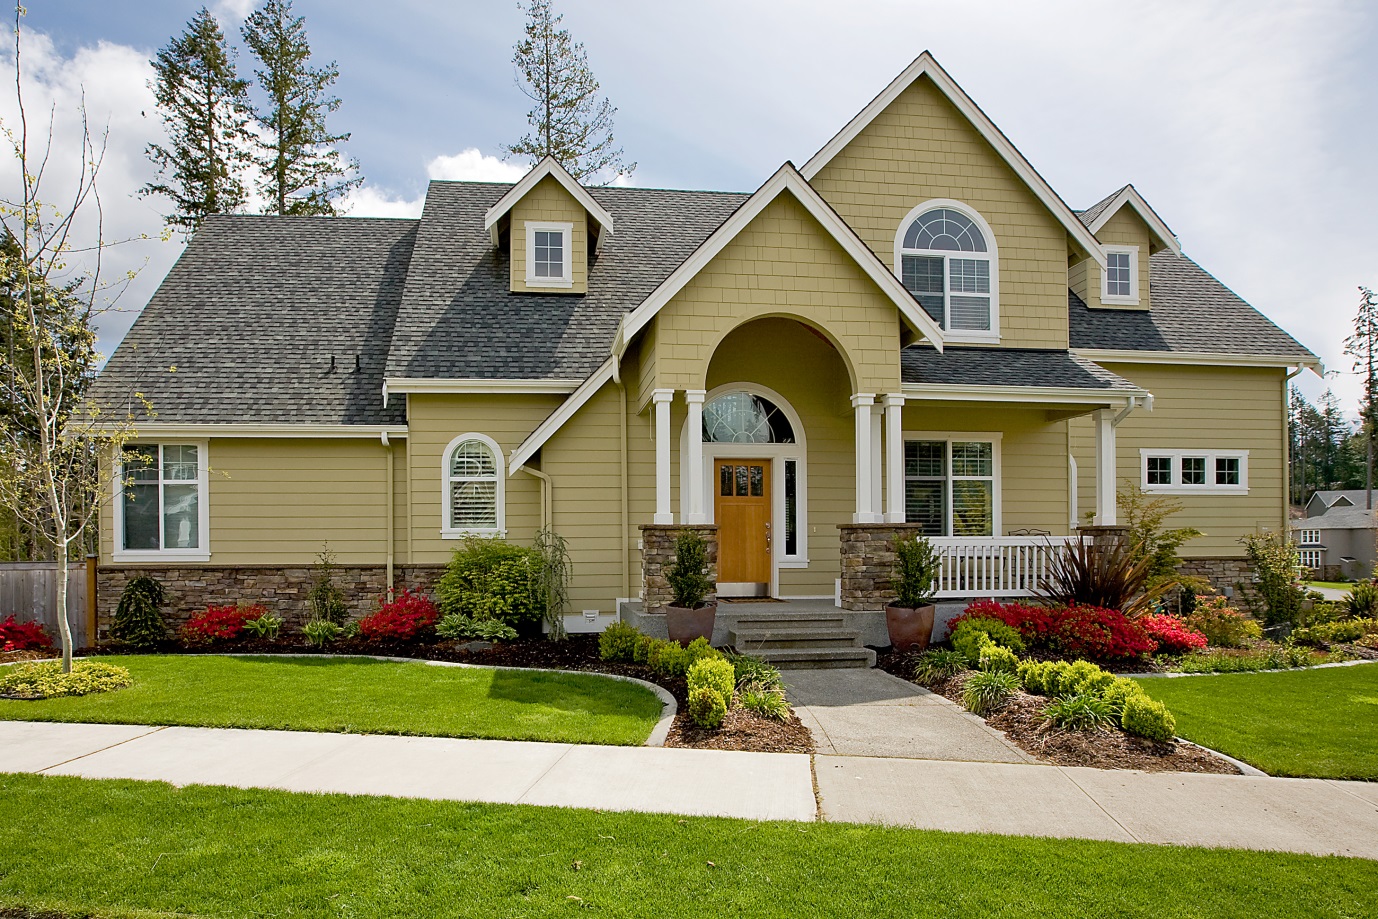 Four Simple Tips to Make the Exterior of Your Home More Appealing